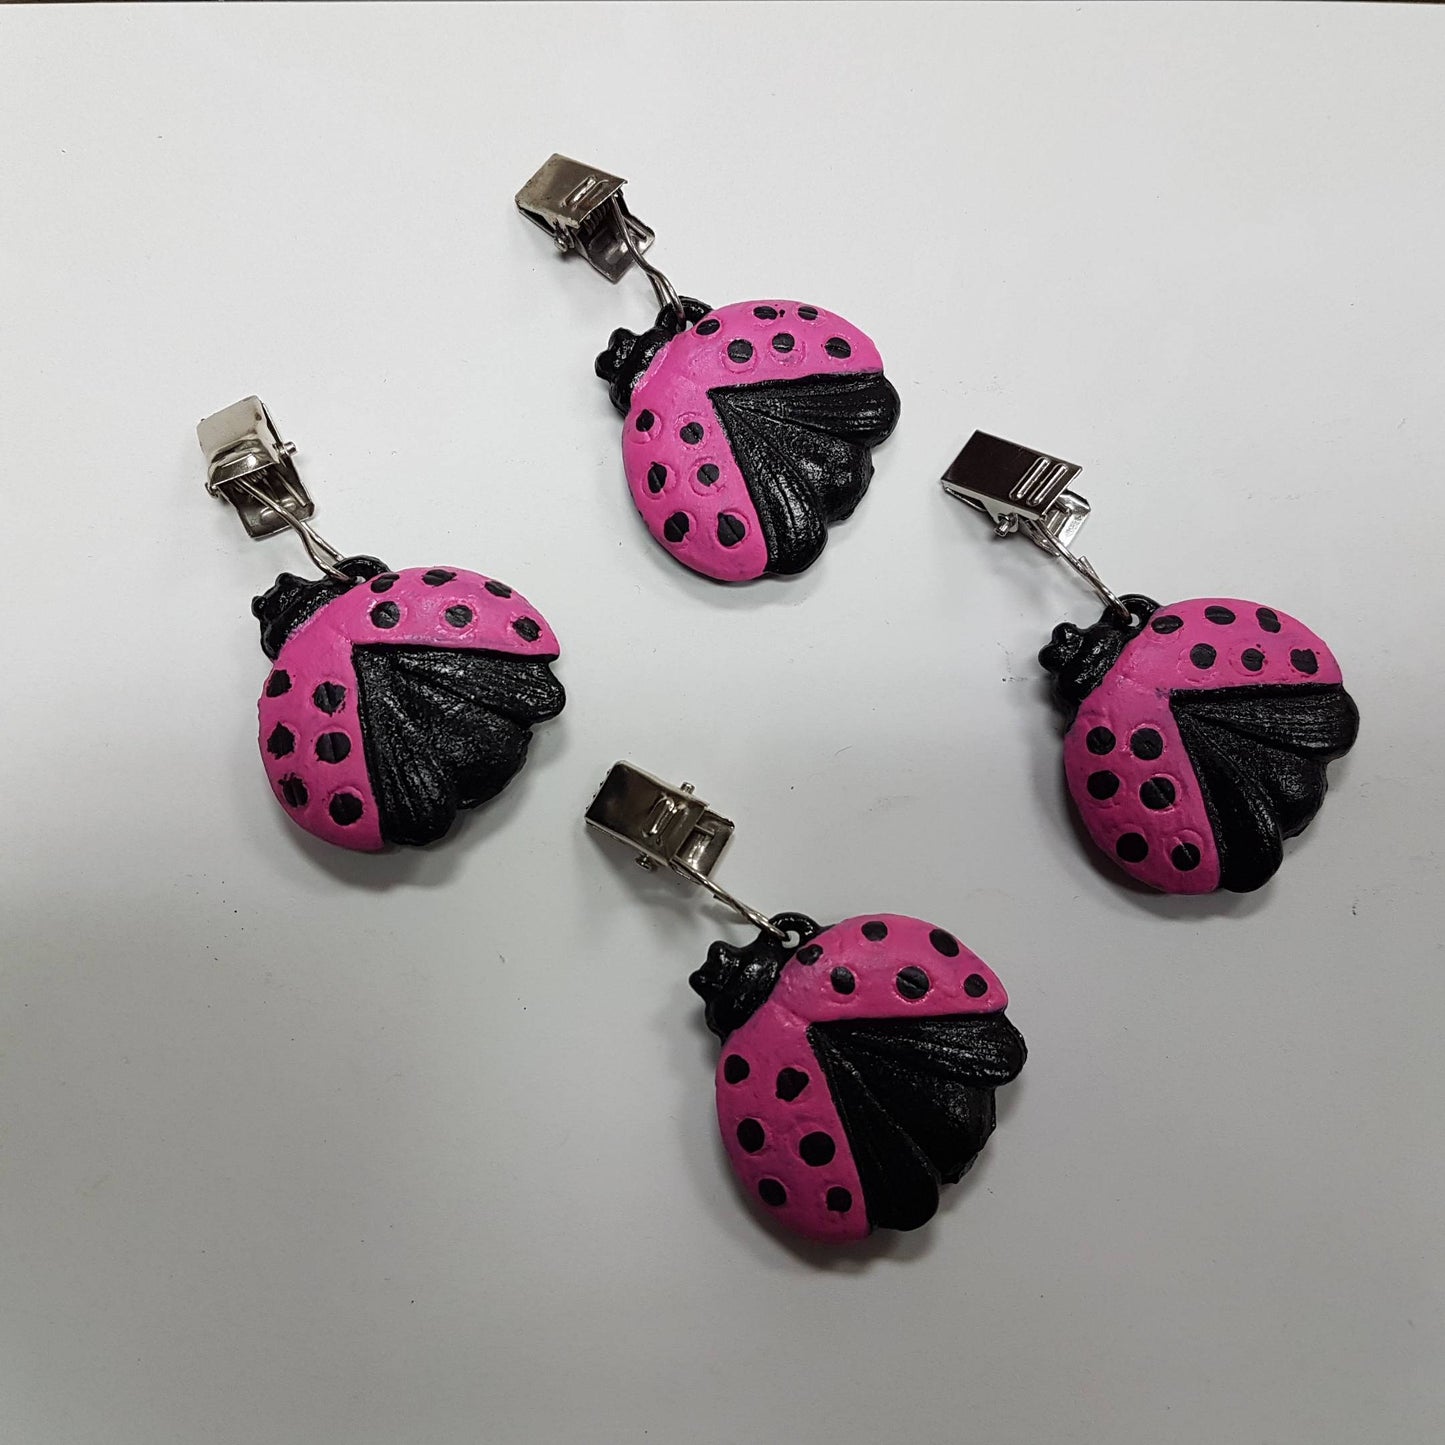 tablecloth weights patio table weights lady bugs